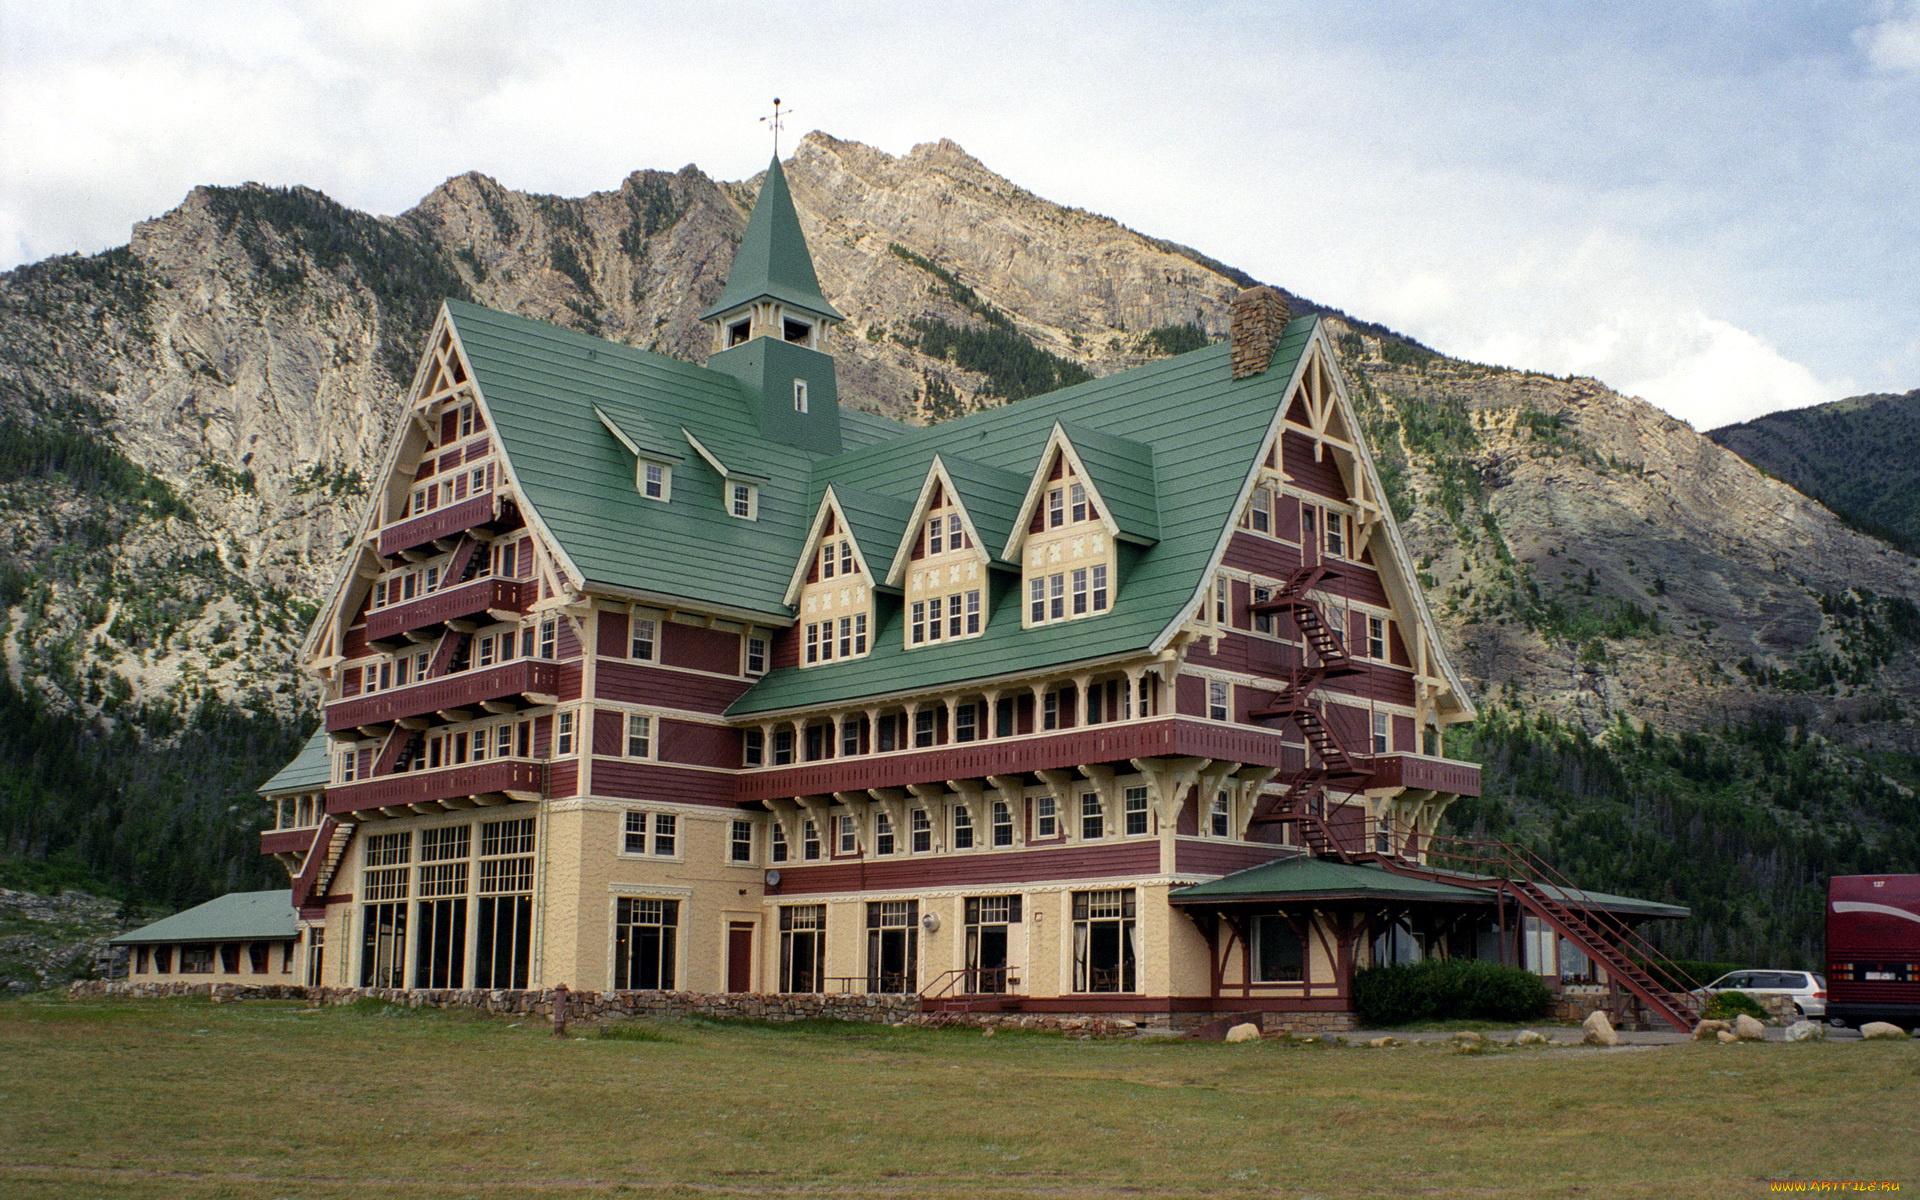 waterton, lakes, national, park, canada, prince, of, wales, hotel, города, здания, дома, гостиница, горы